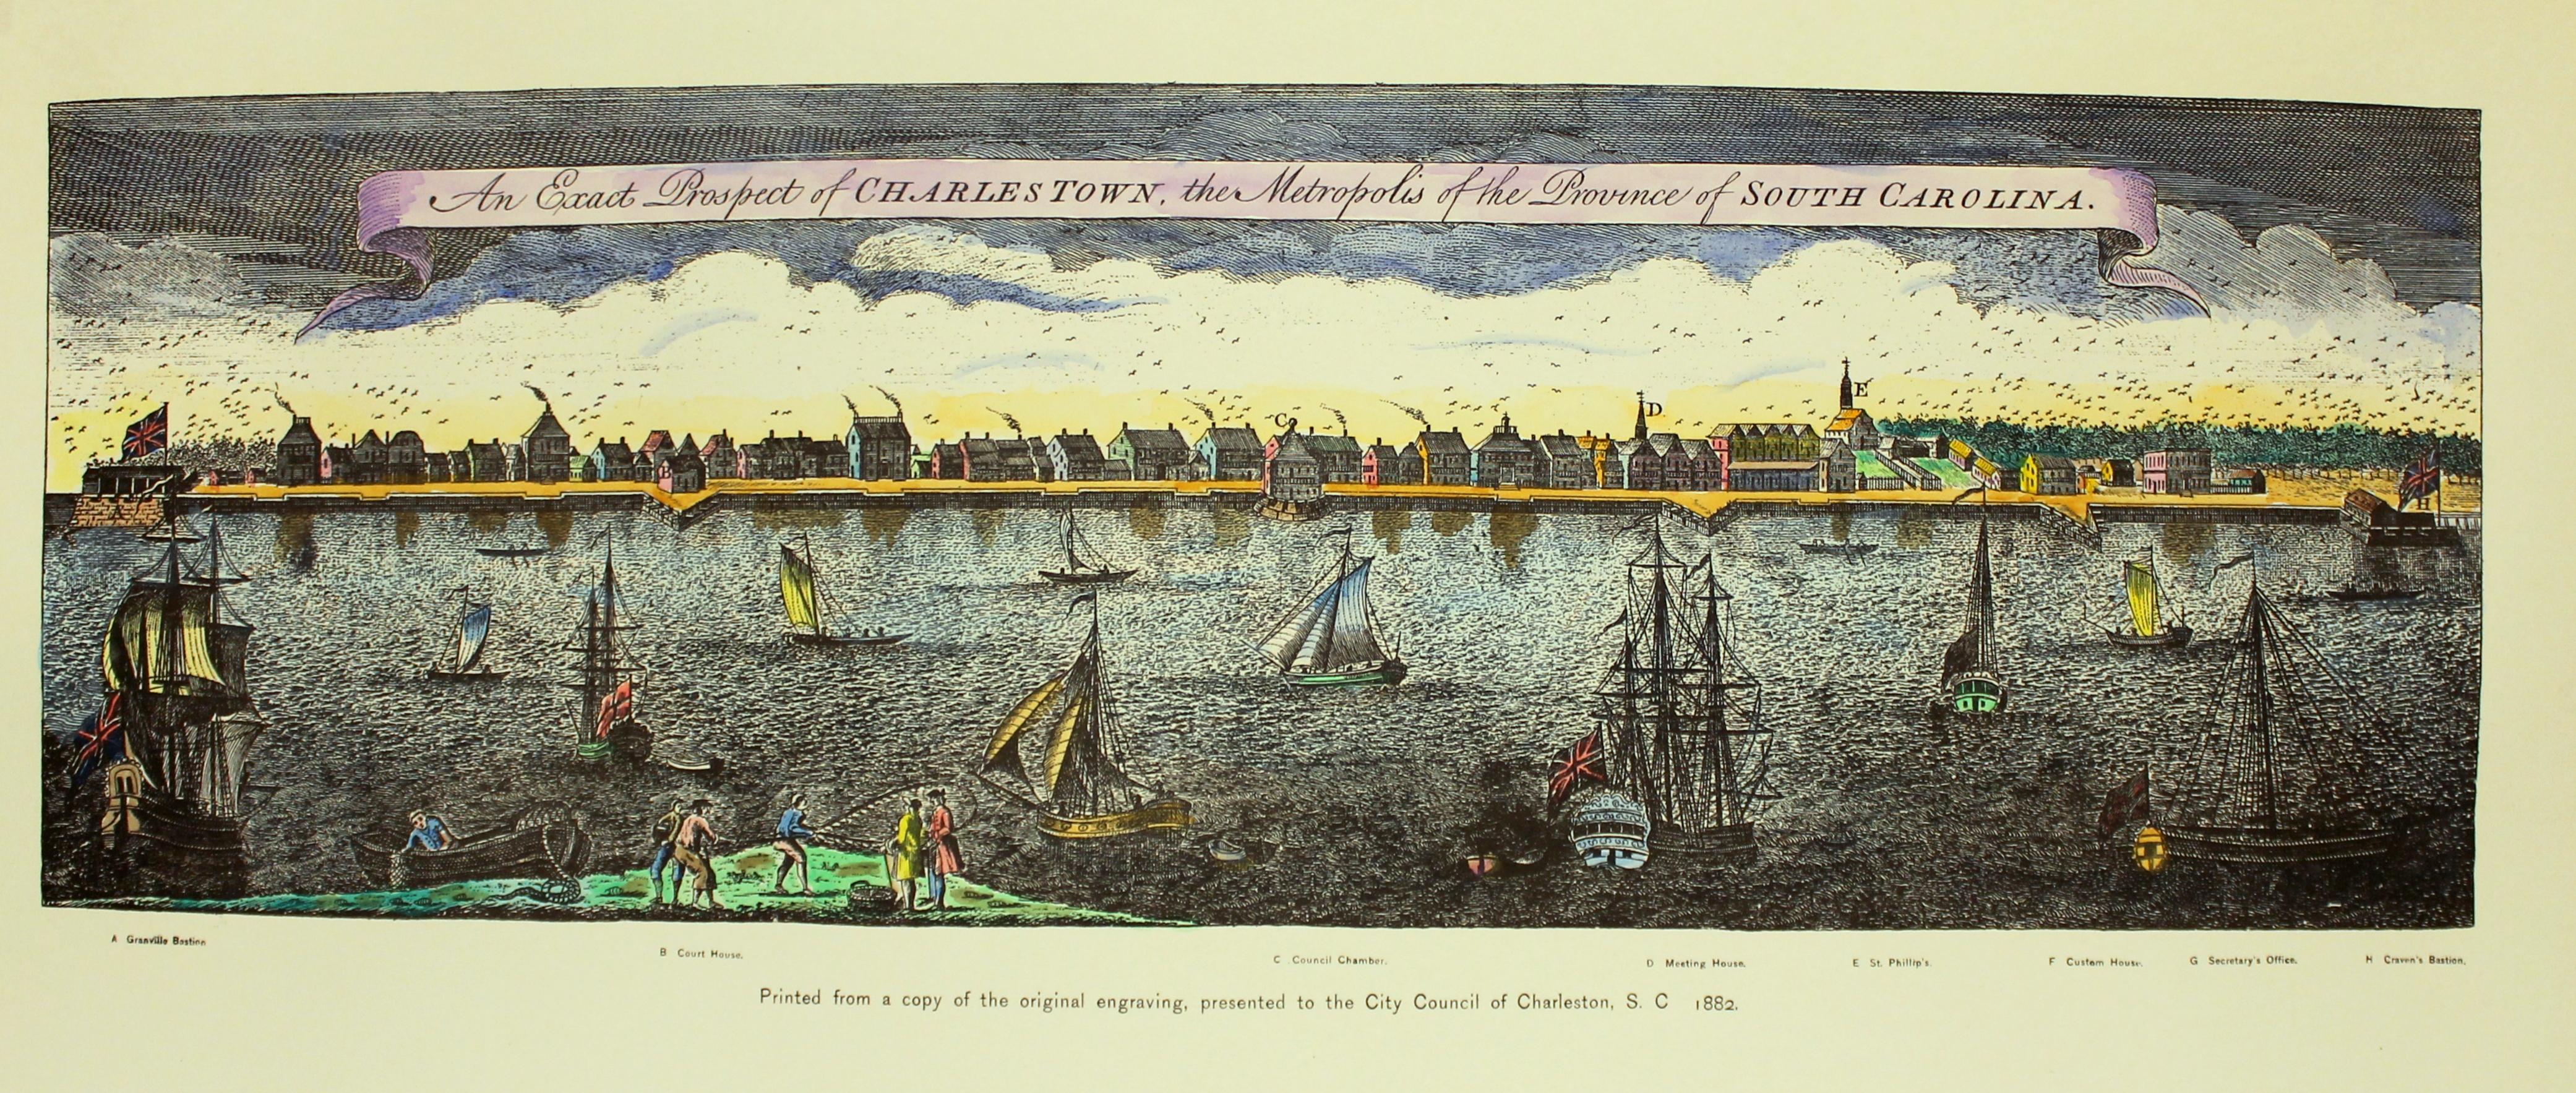 Exact Prospect of CharlesTown, the Metropolis of the Province of South Carolina, Print made Circa 1950-60

Printed from a copy of the original engraving (original engraving likely circa 1760- 1770) presented to the City Council of Charleston, SC,